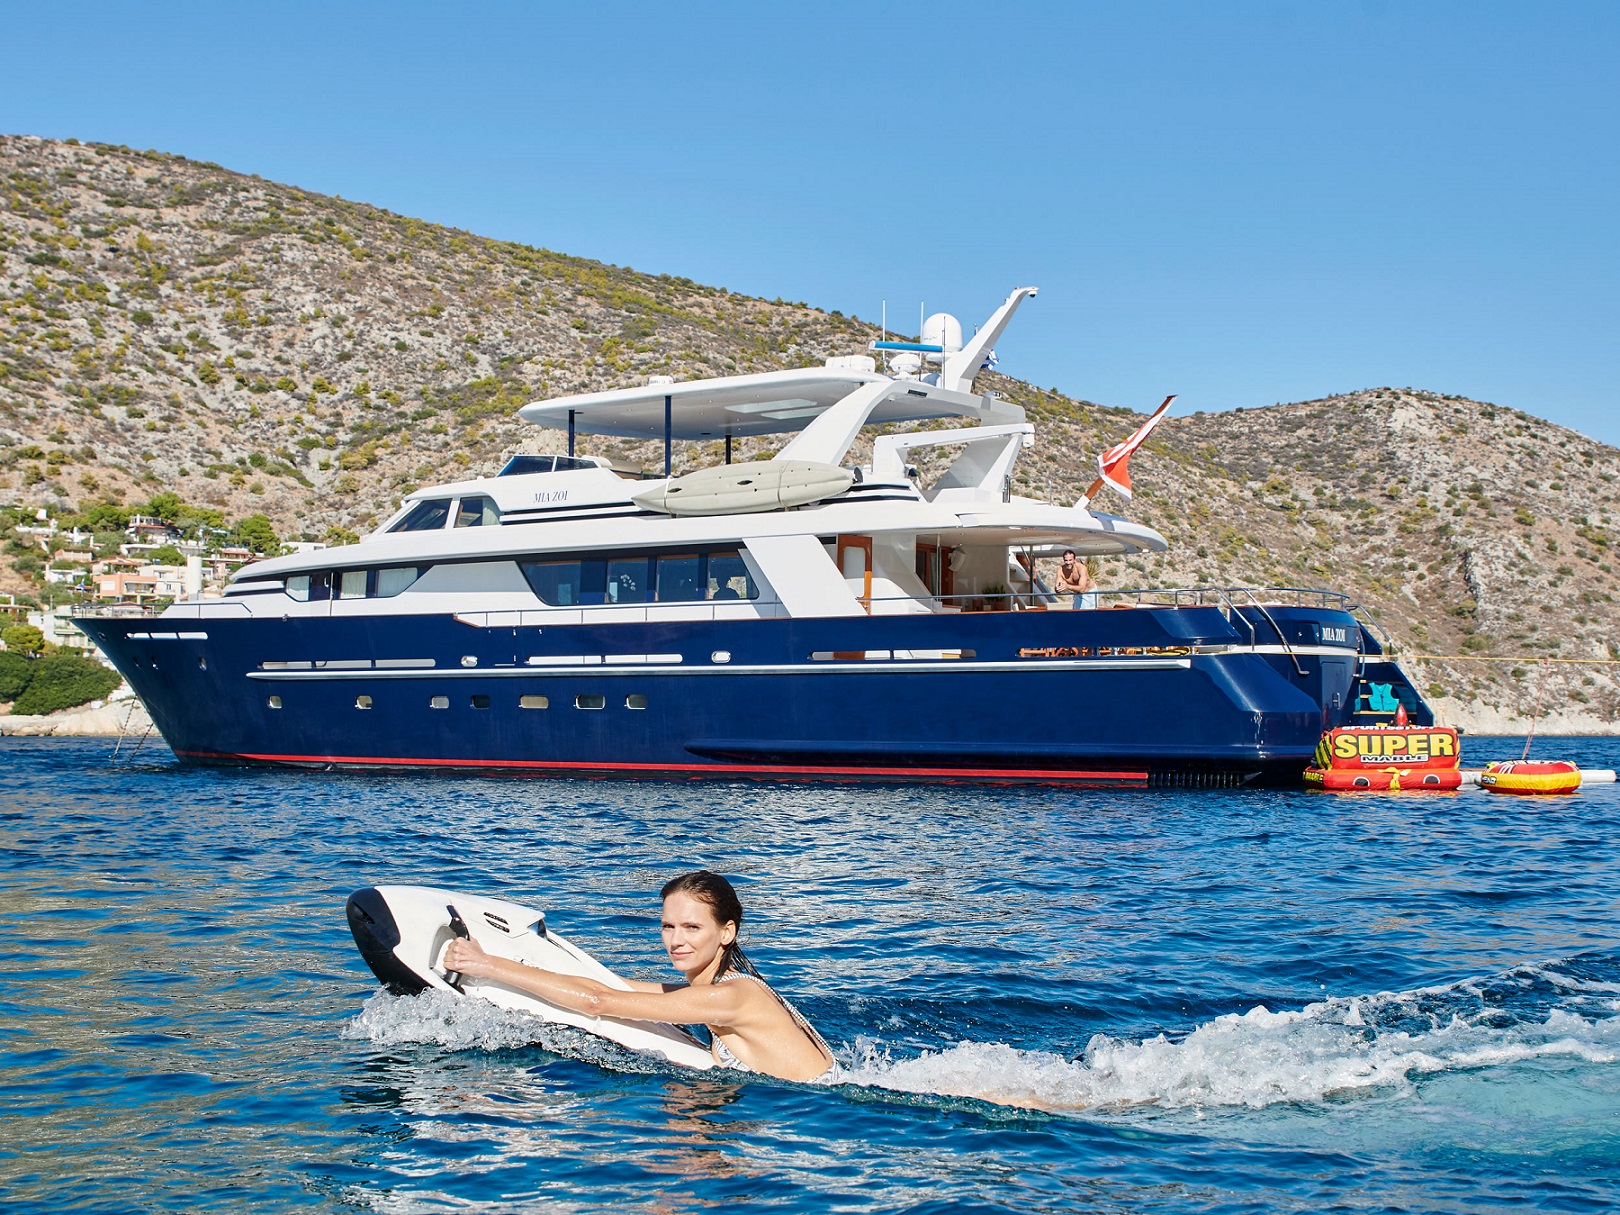 New Sales CA: Motor yacht MIA ZOI; an exquisite Vitters yacht for sale